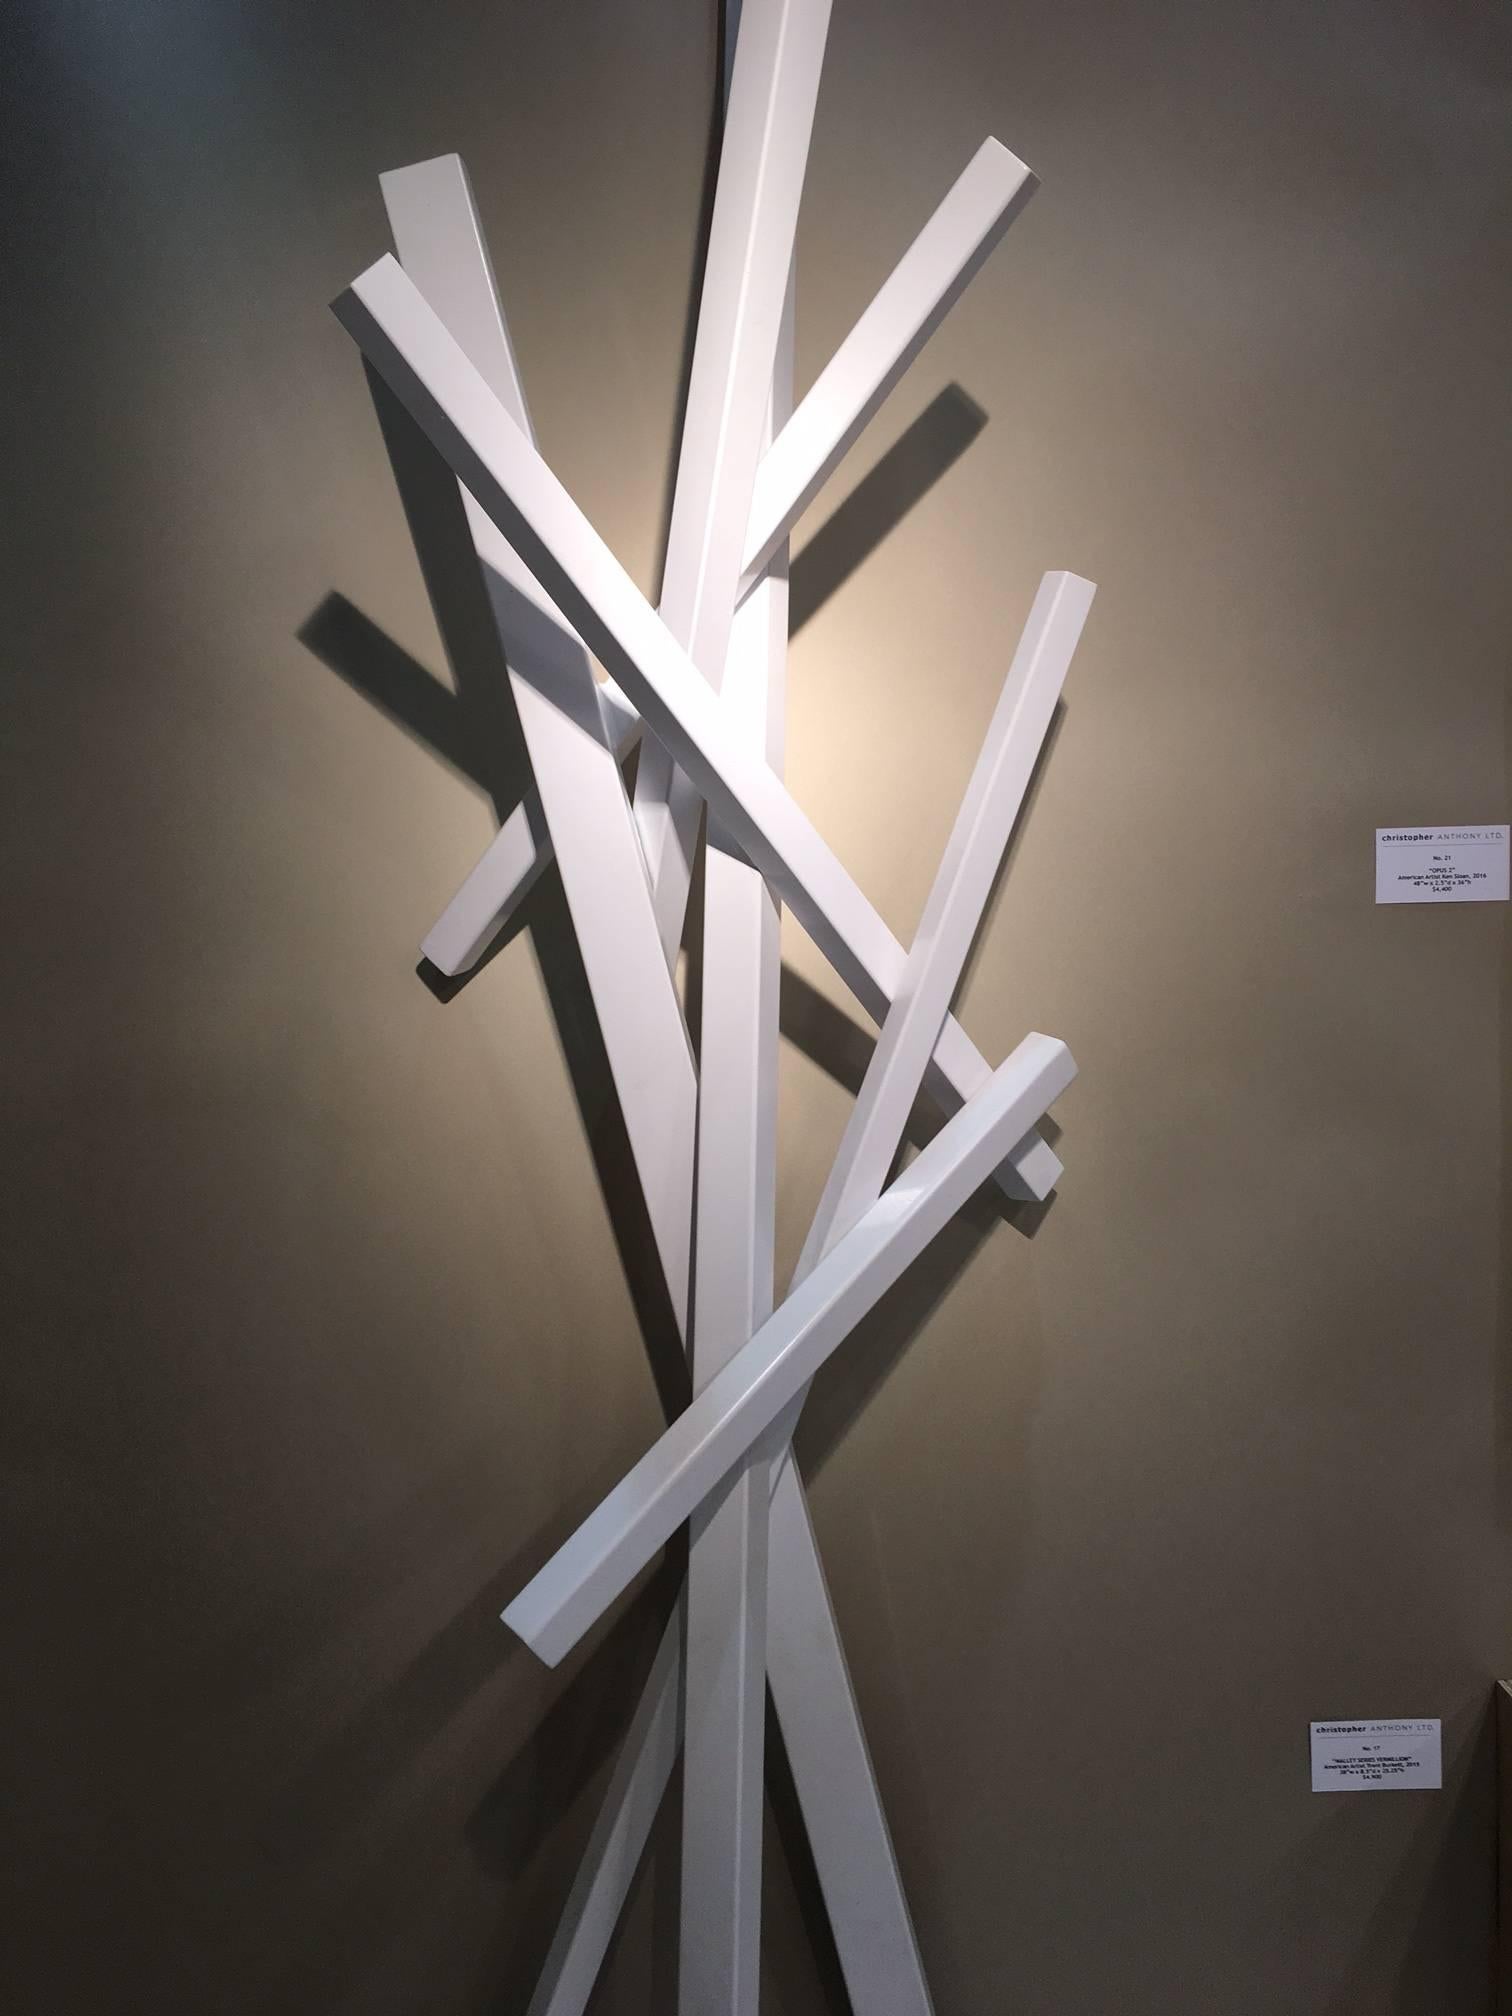 "The Fifth Position" An original wall mounted sculpture by American artist Joey Vaiasuso. This contemporary welded steel sculpture has been professionally powder coated in a pure white. A master of composition and geometry, Mr. Vaiasuso